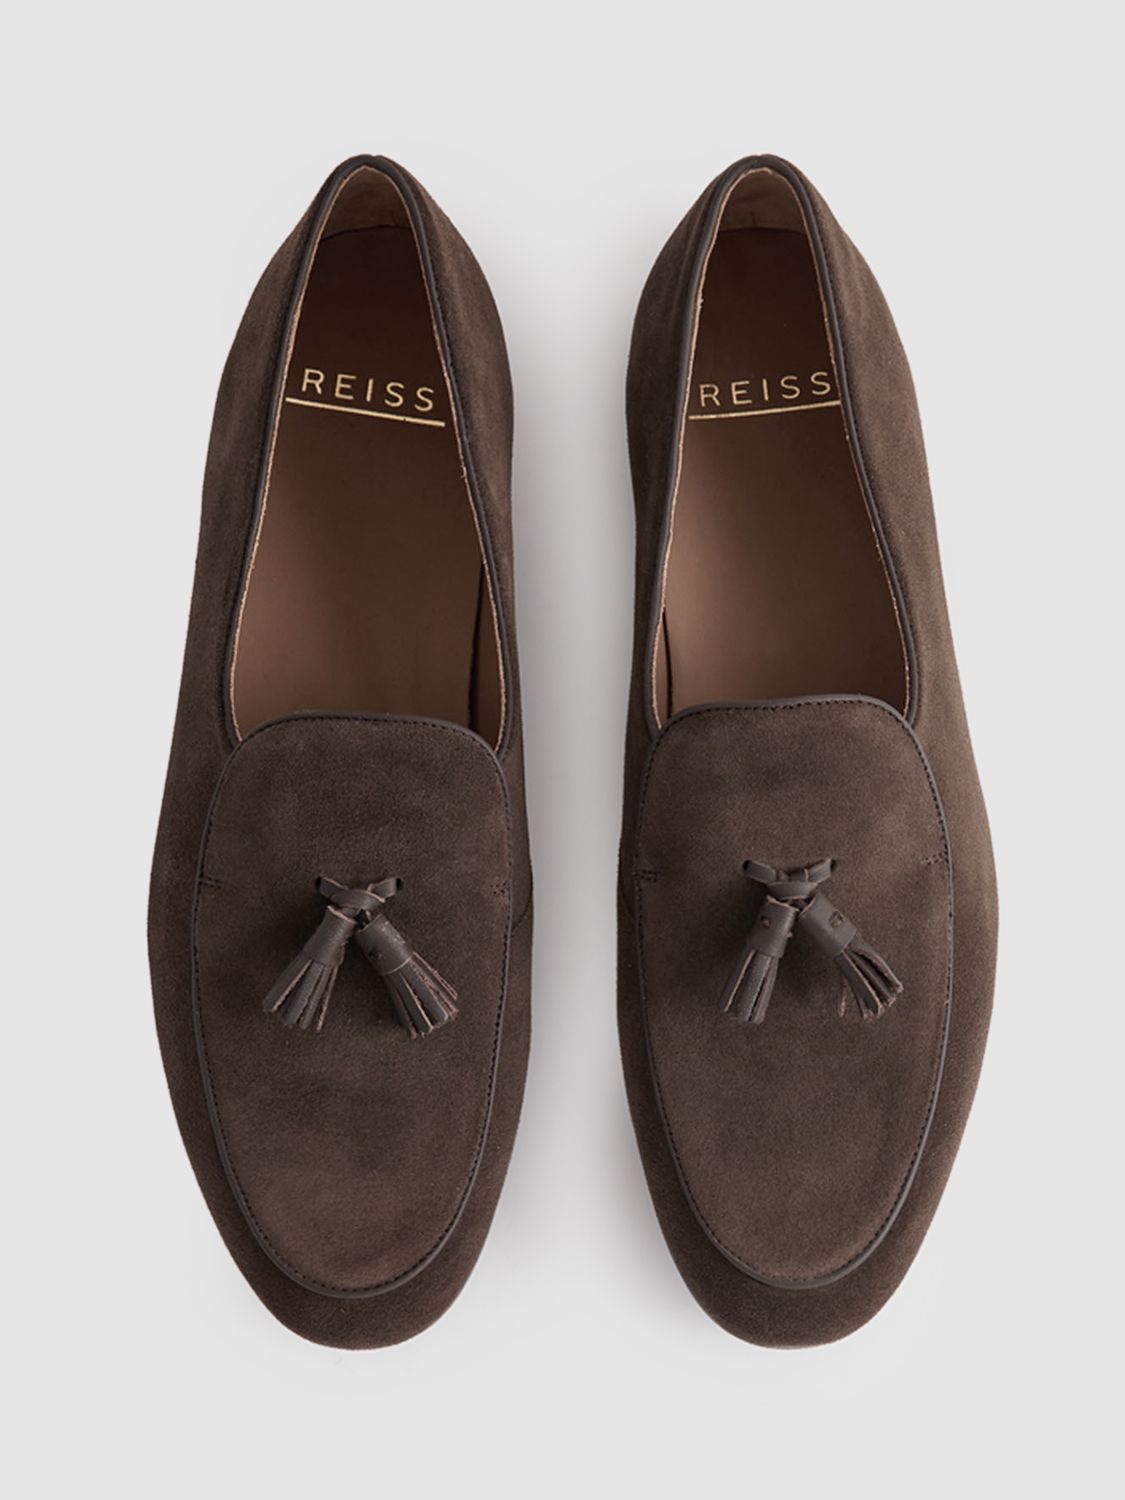 Buy Reiss Harry Leather Tassel Loafers Online at johnlewis.com